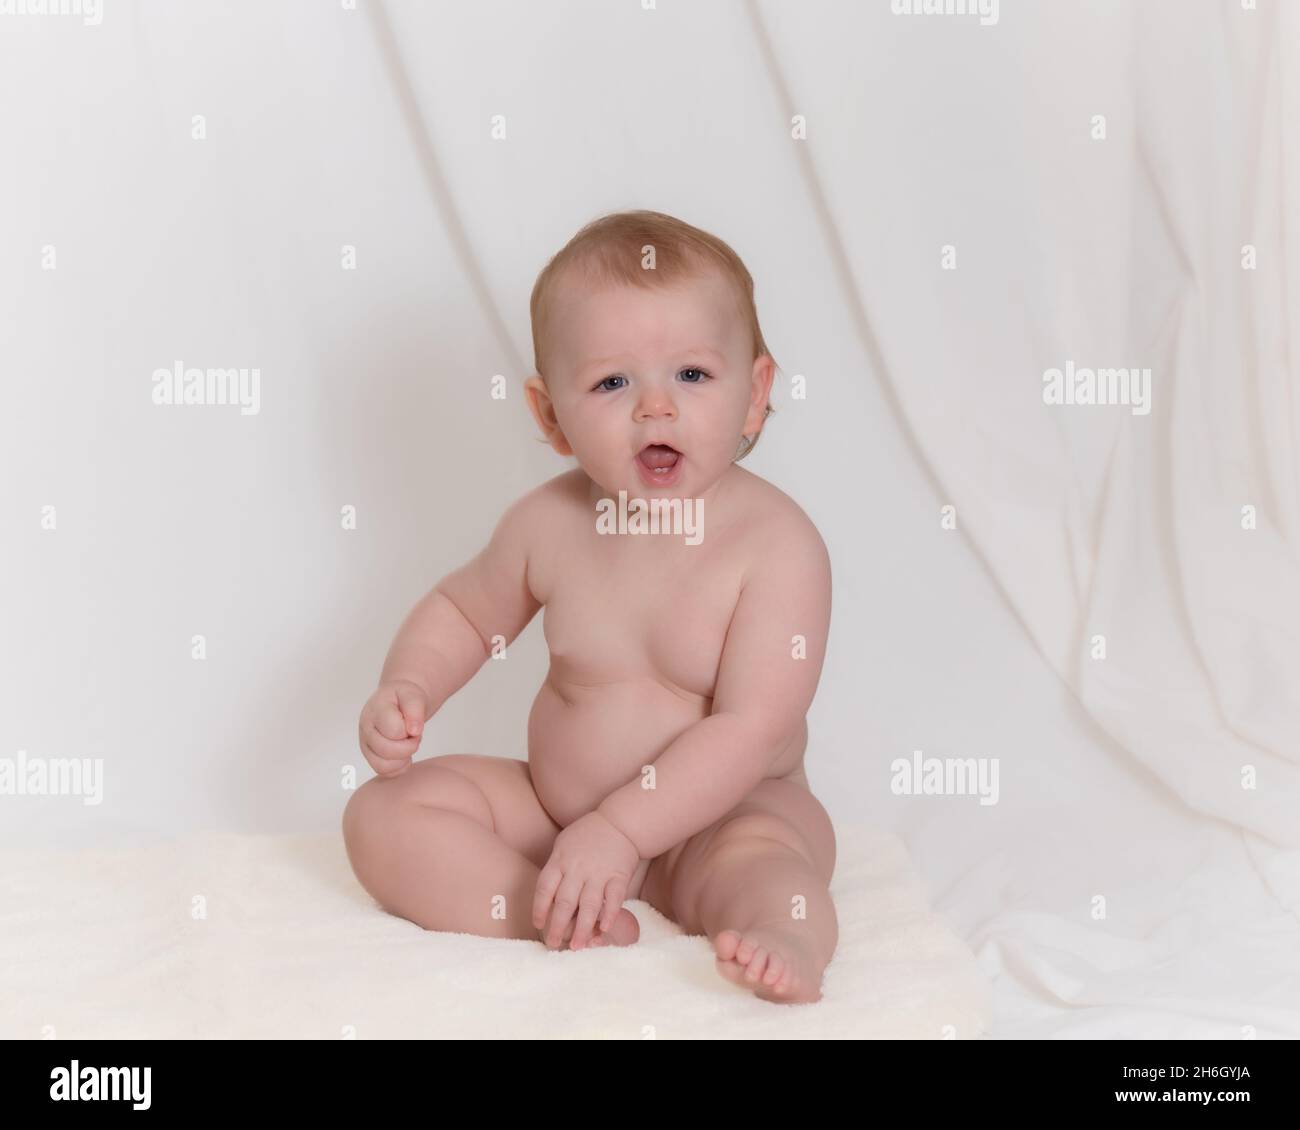 One year old baby without clothes Stock Photo